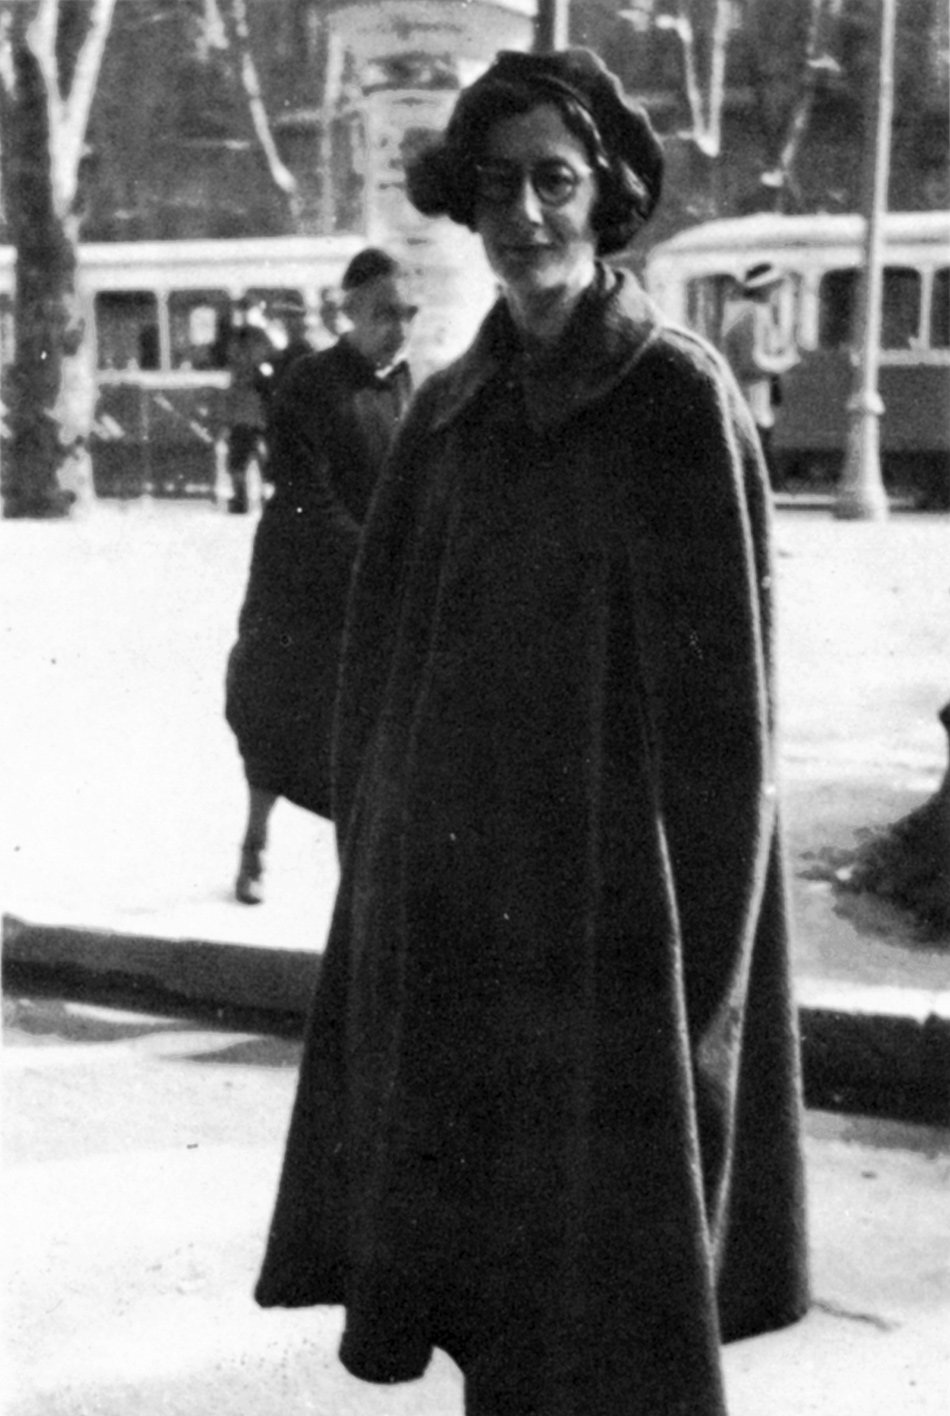 Simone Weil in Marseilles, early 1940s